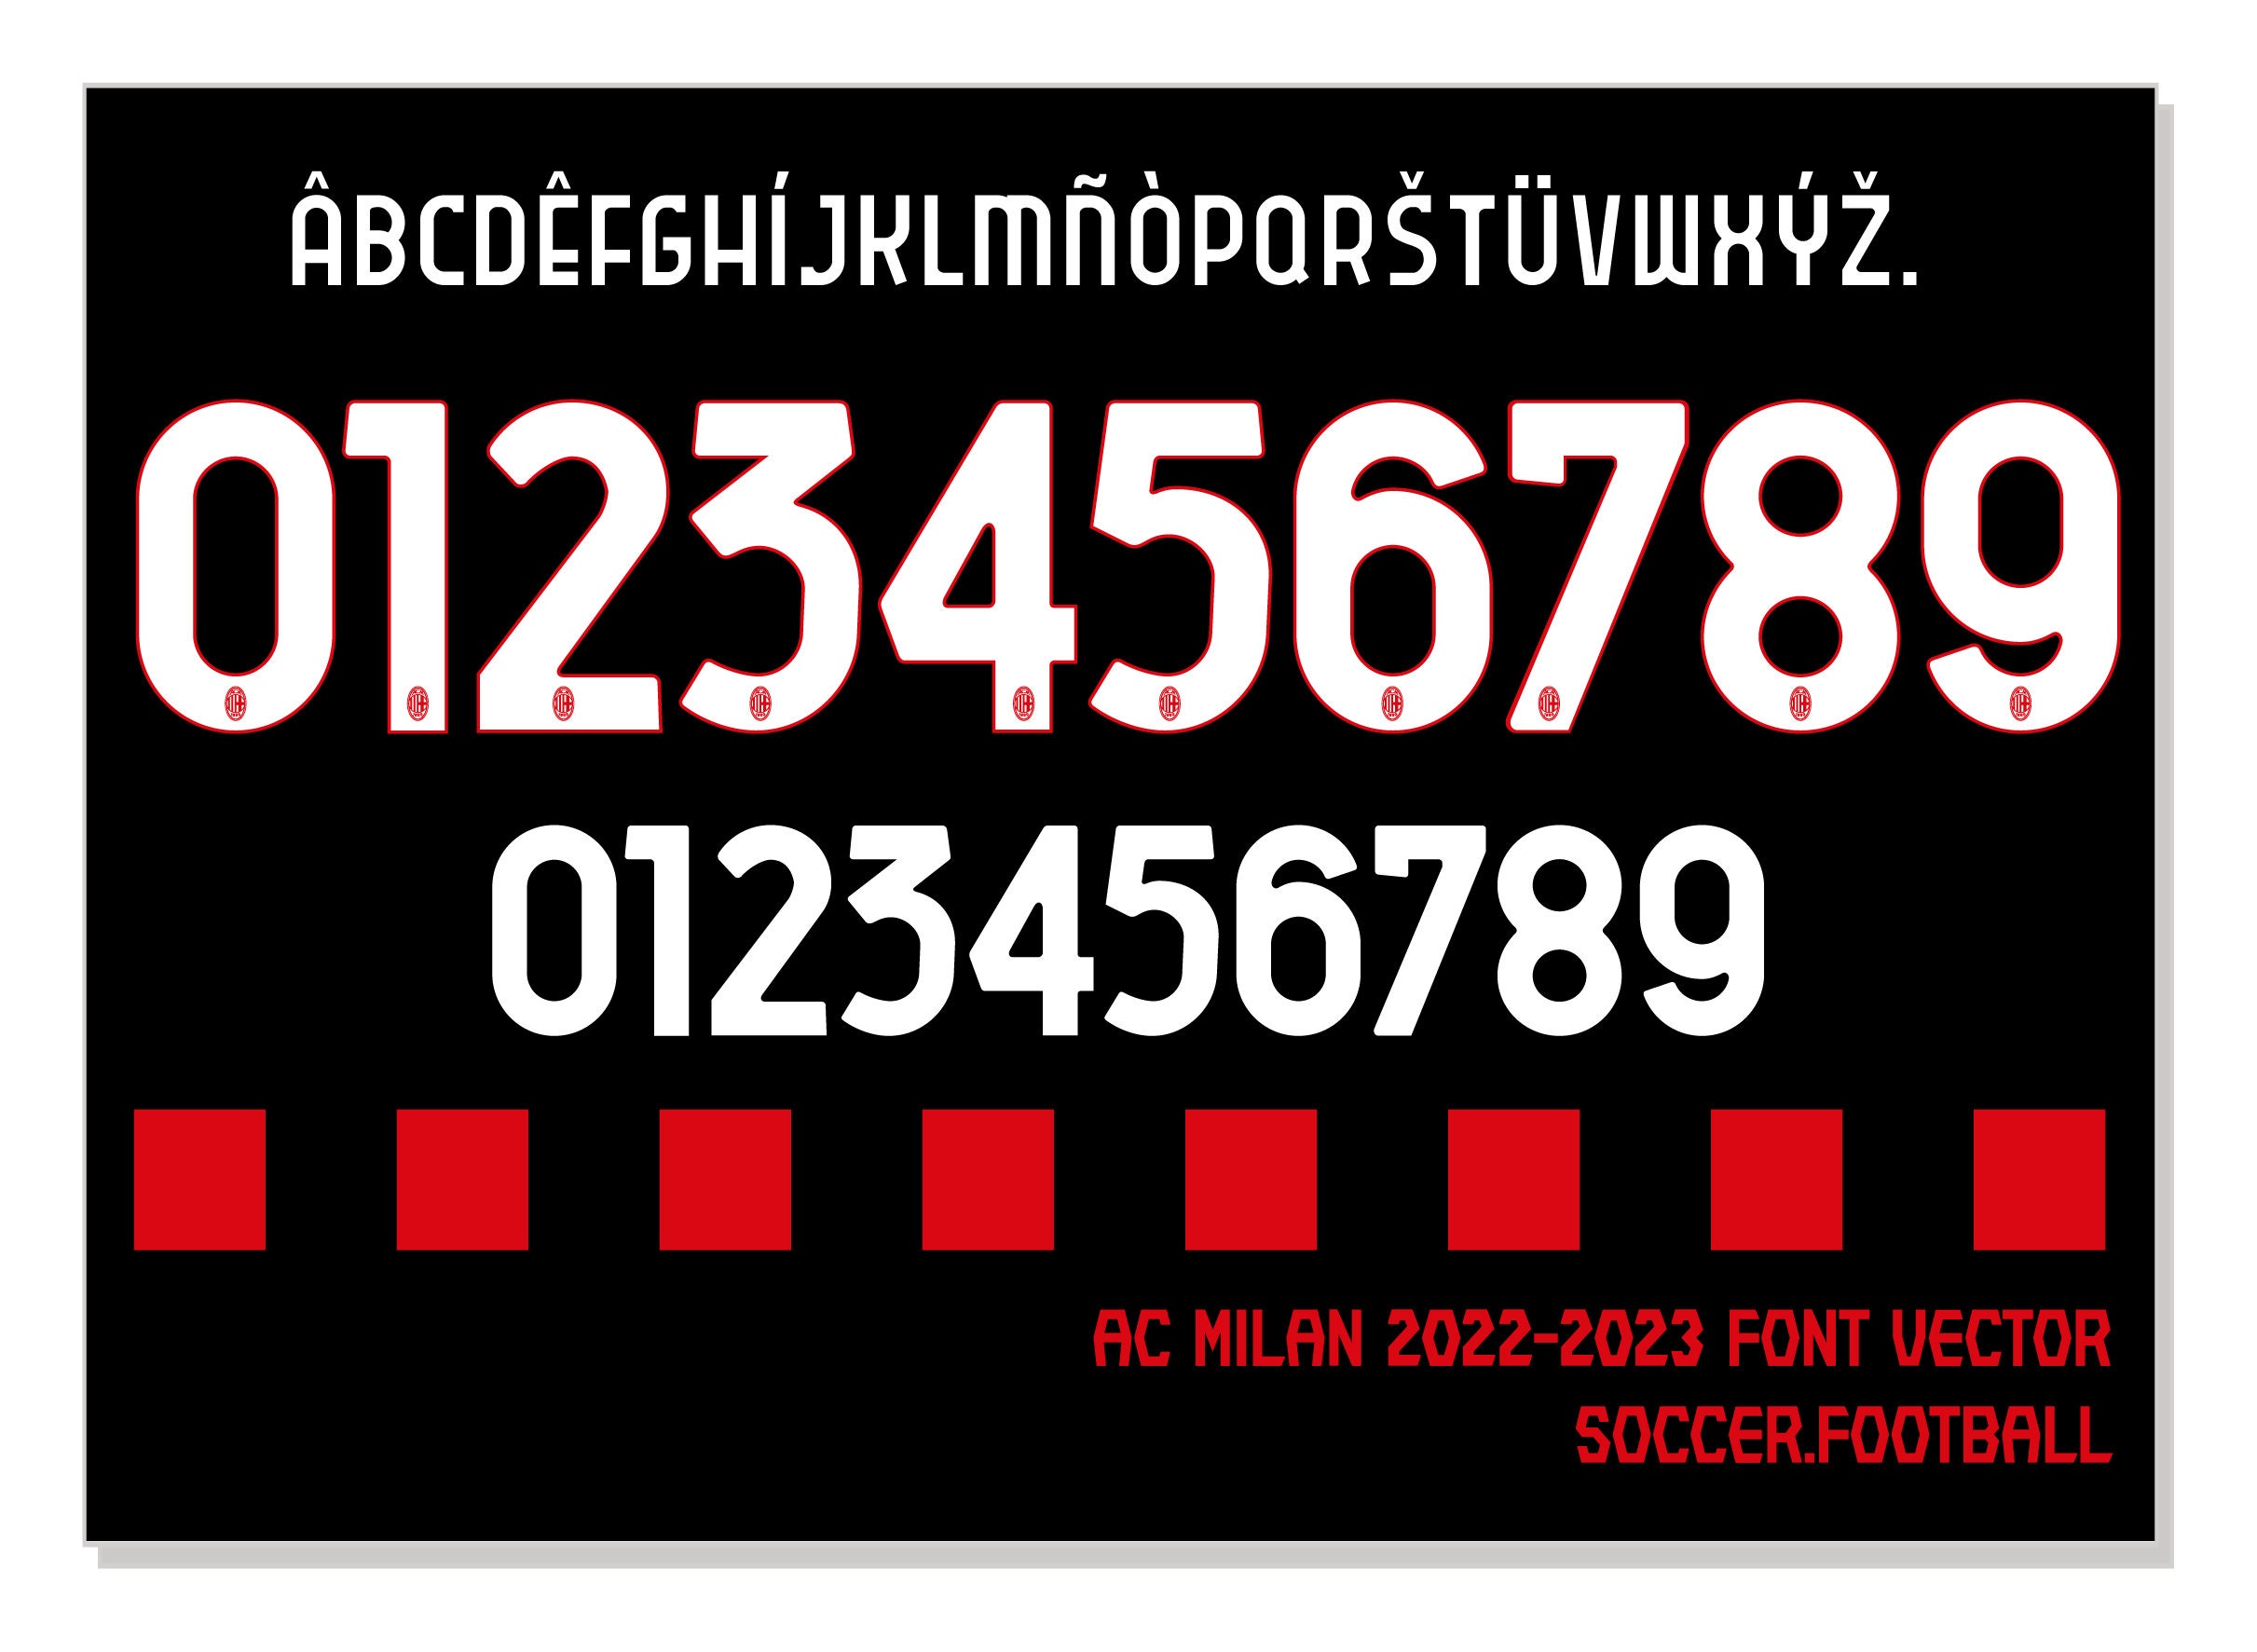 Football Font: Inter Miami 2023-2024 Font in 2023